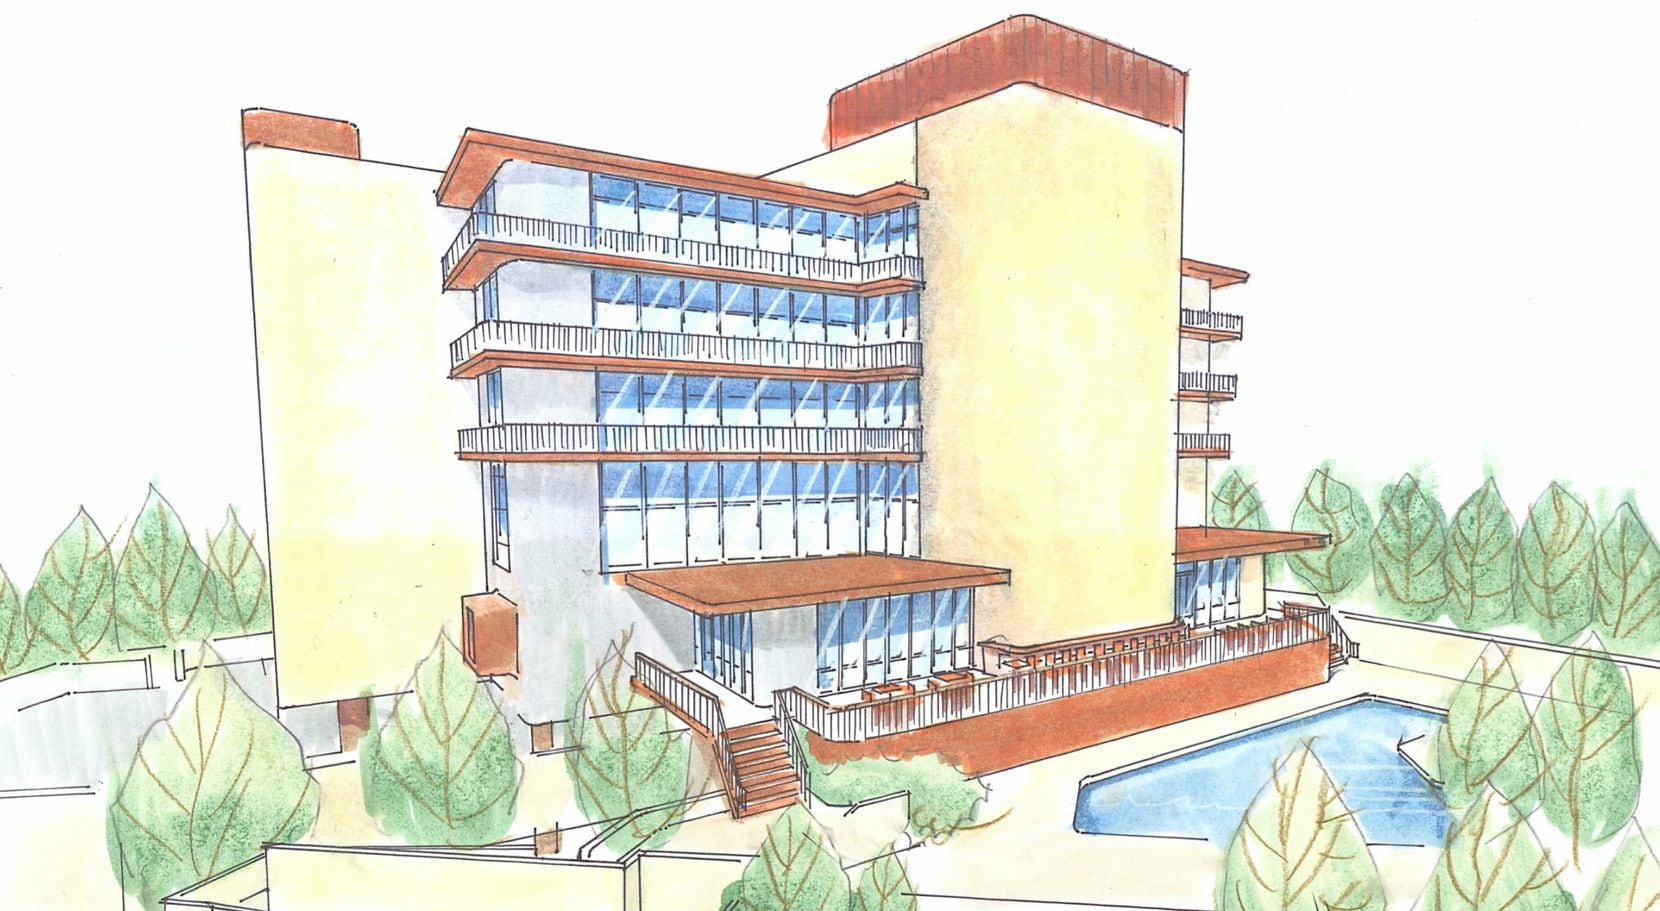 Centurion American Development plans to turn the building into a boutique hotel and restaurant.